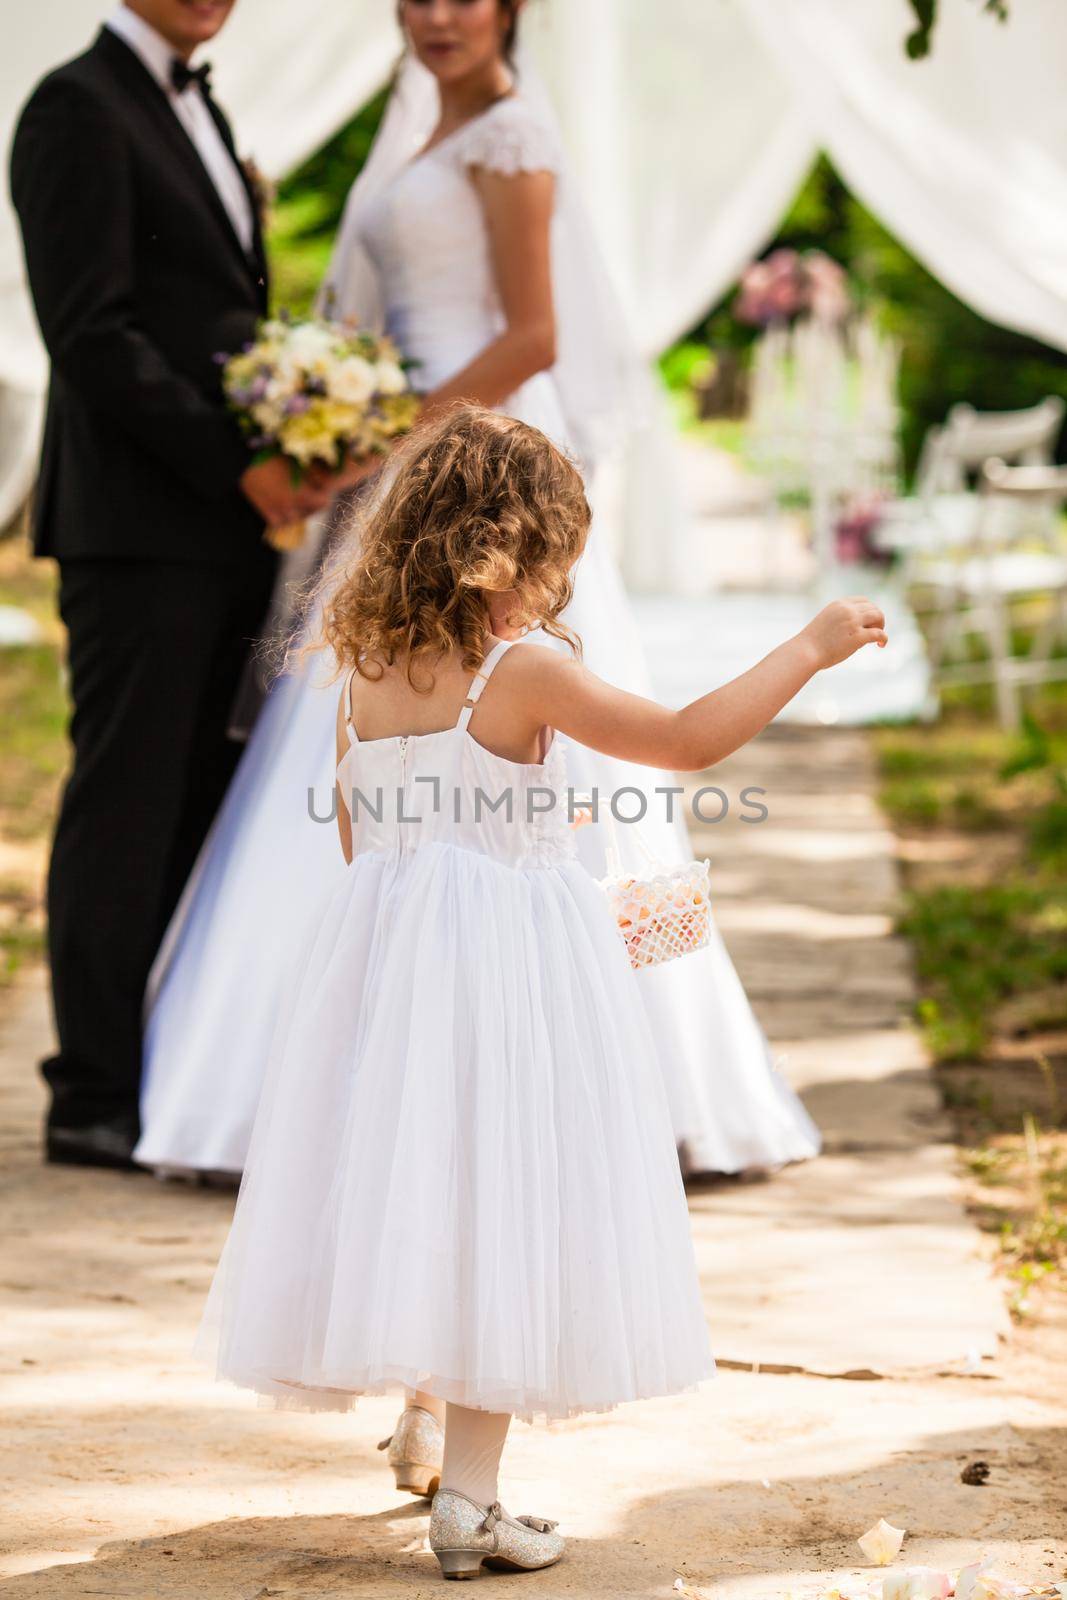 The little girl and brides at the outdoor ceremony by oksix